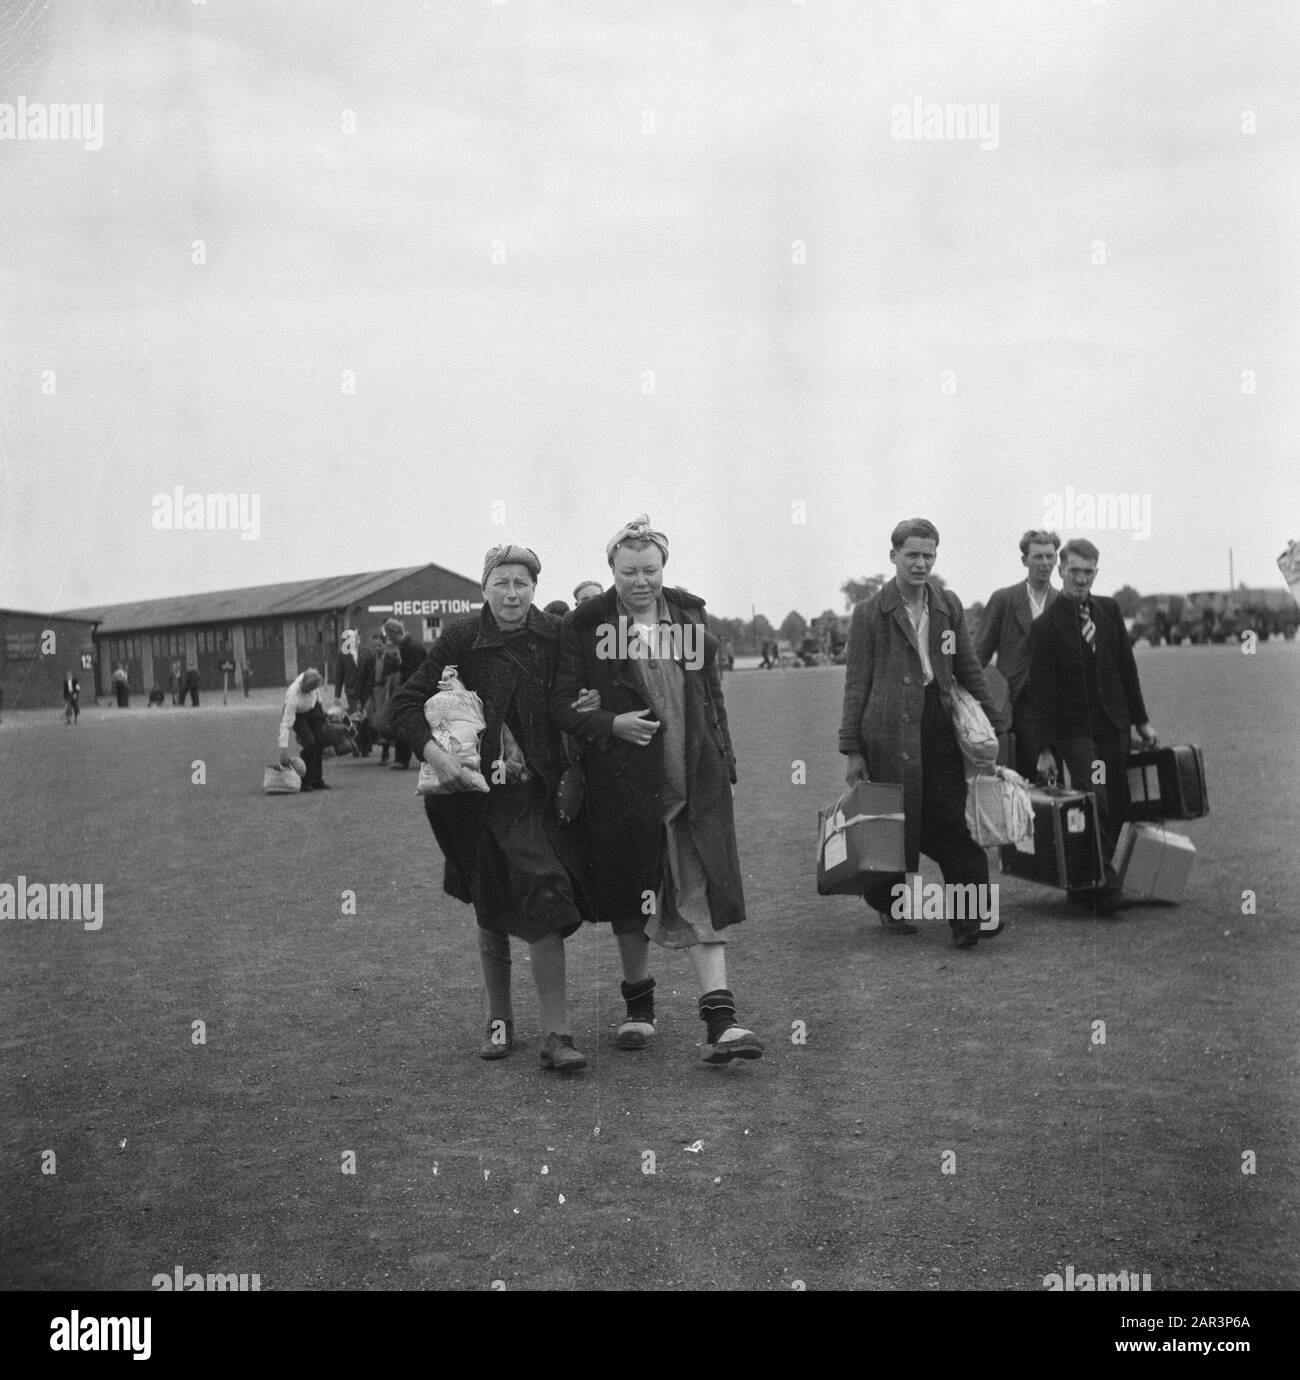 Repatriation Camp Rheine (Germany)  [Repatriants at a gathering place with luggage] Date: 1945 Location: Germany, Rheine Keywords: repatriation, World War II Stock Photo